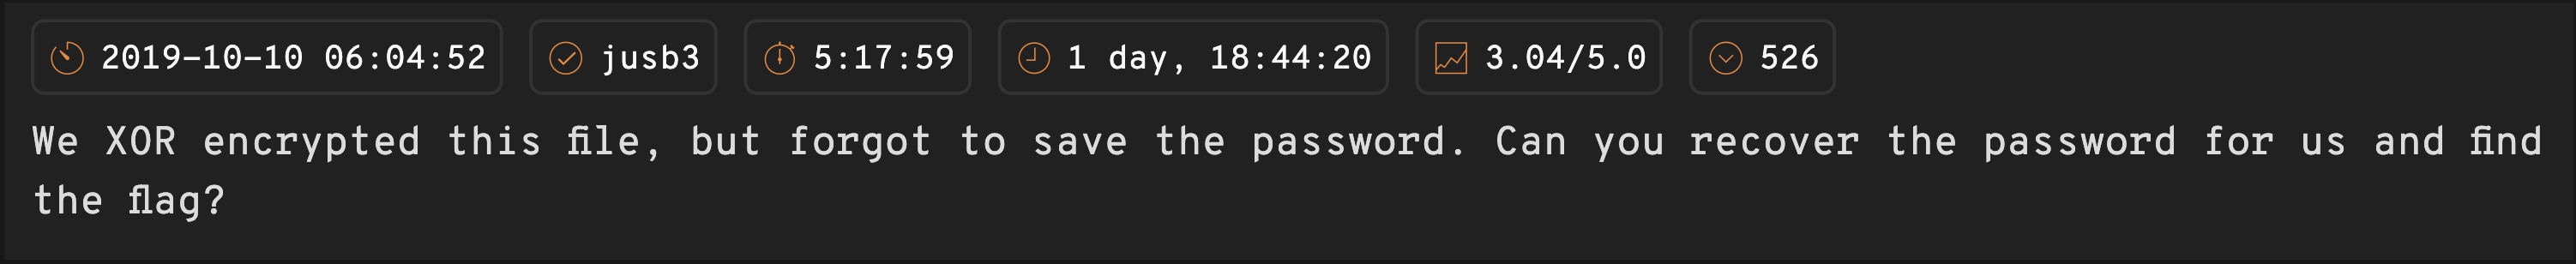 Text reads: "We XOR encrypted this file, but forgot to save the password. Can you recover the password for us and find the flag?"